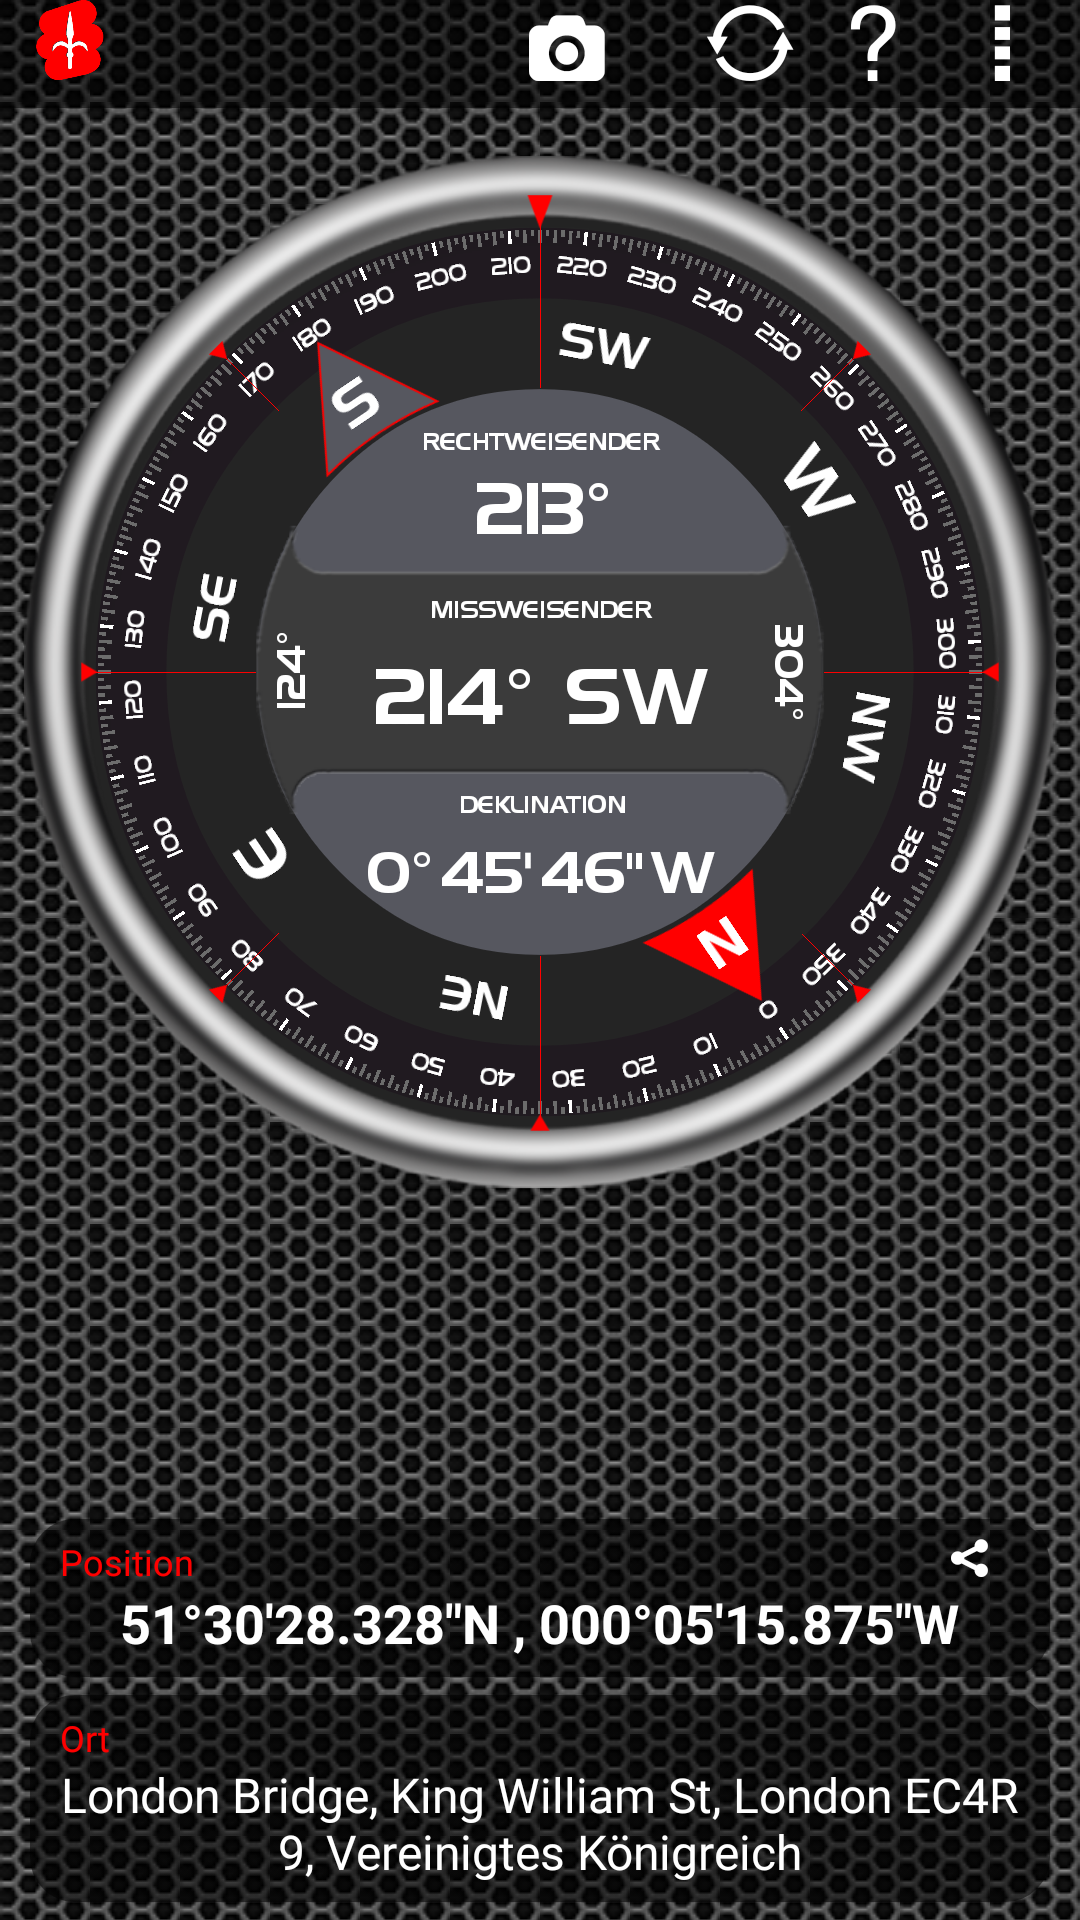 Android application AndroiTS Compass Pro screenshort